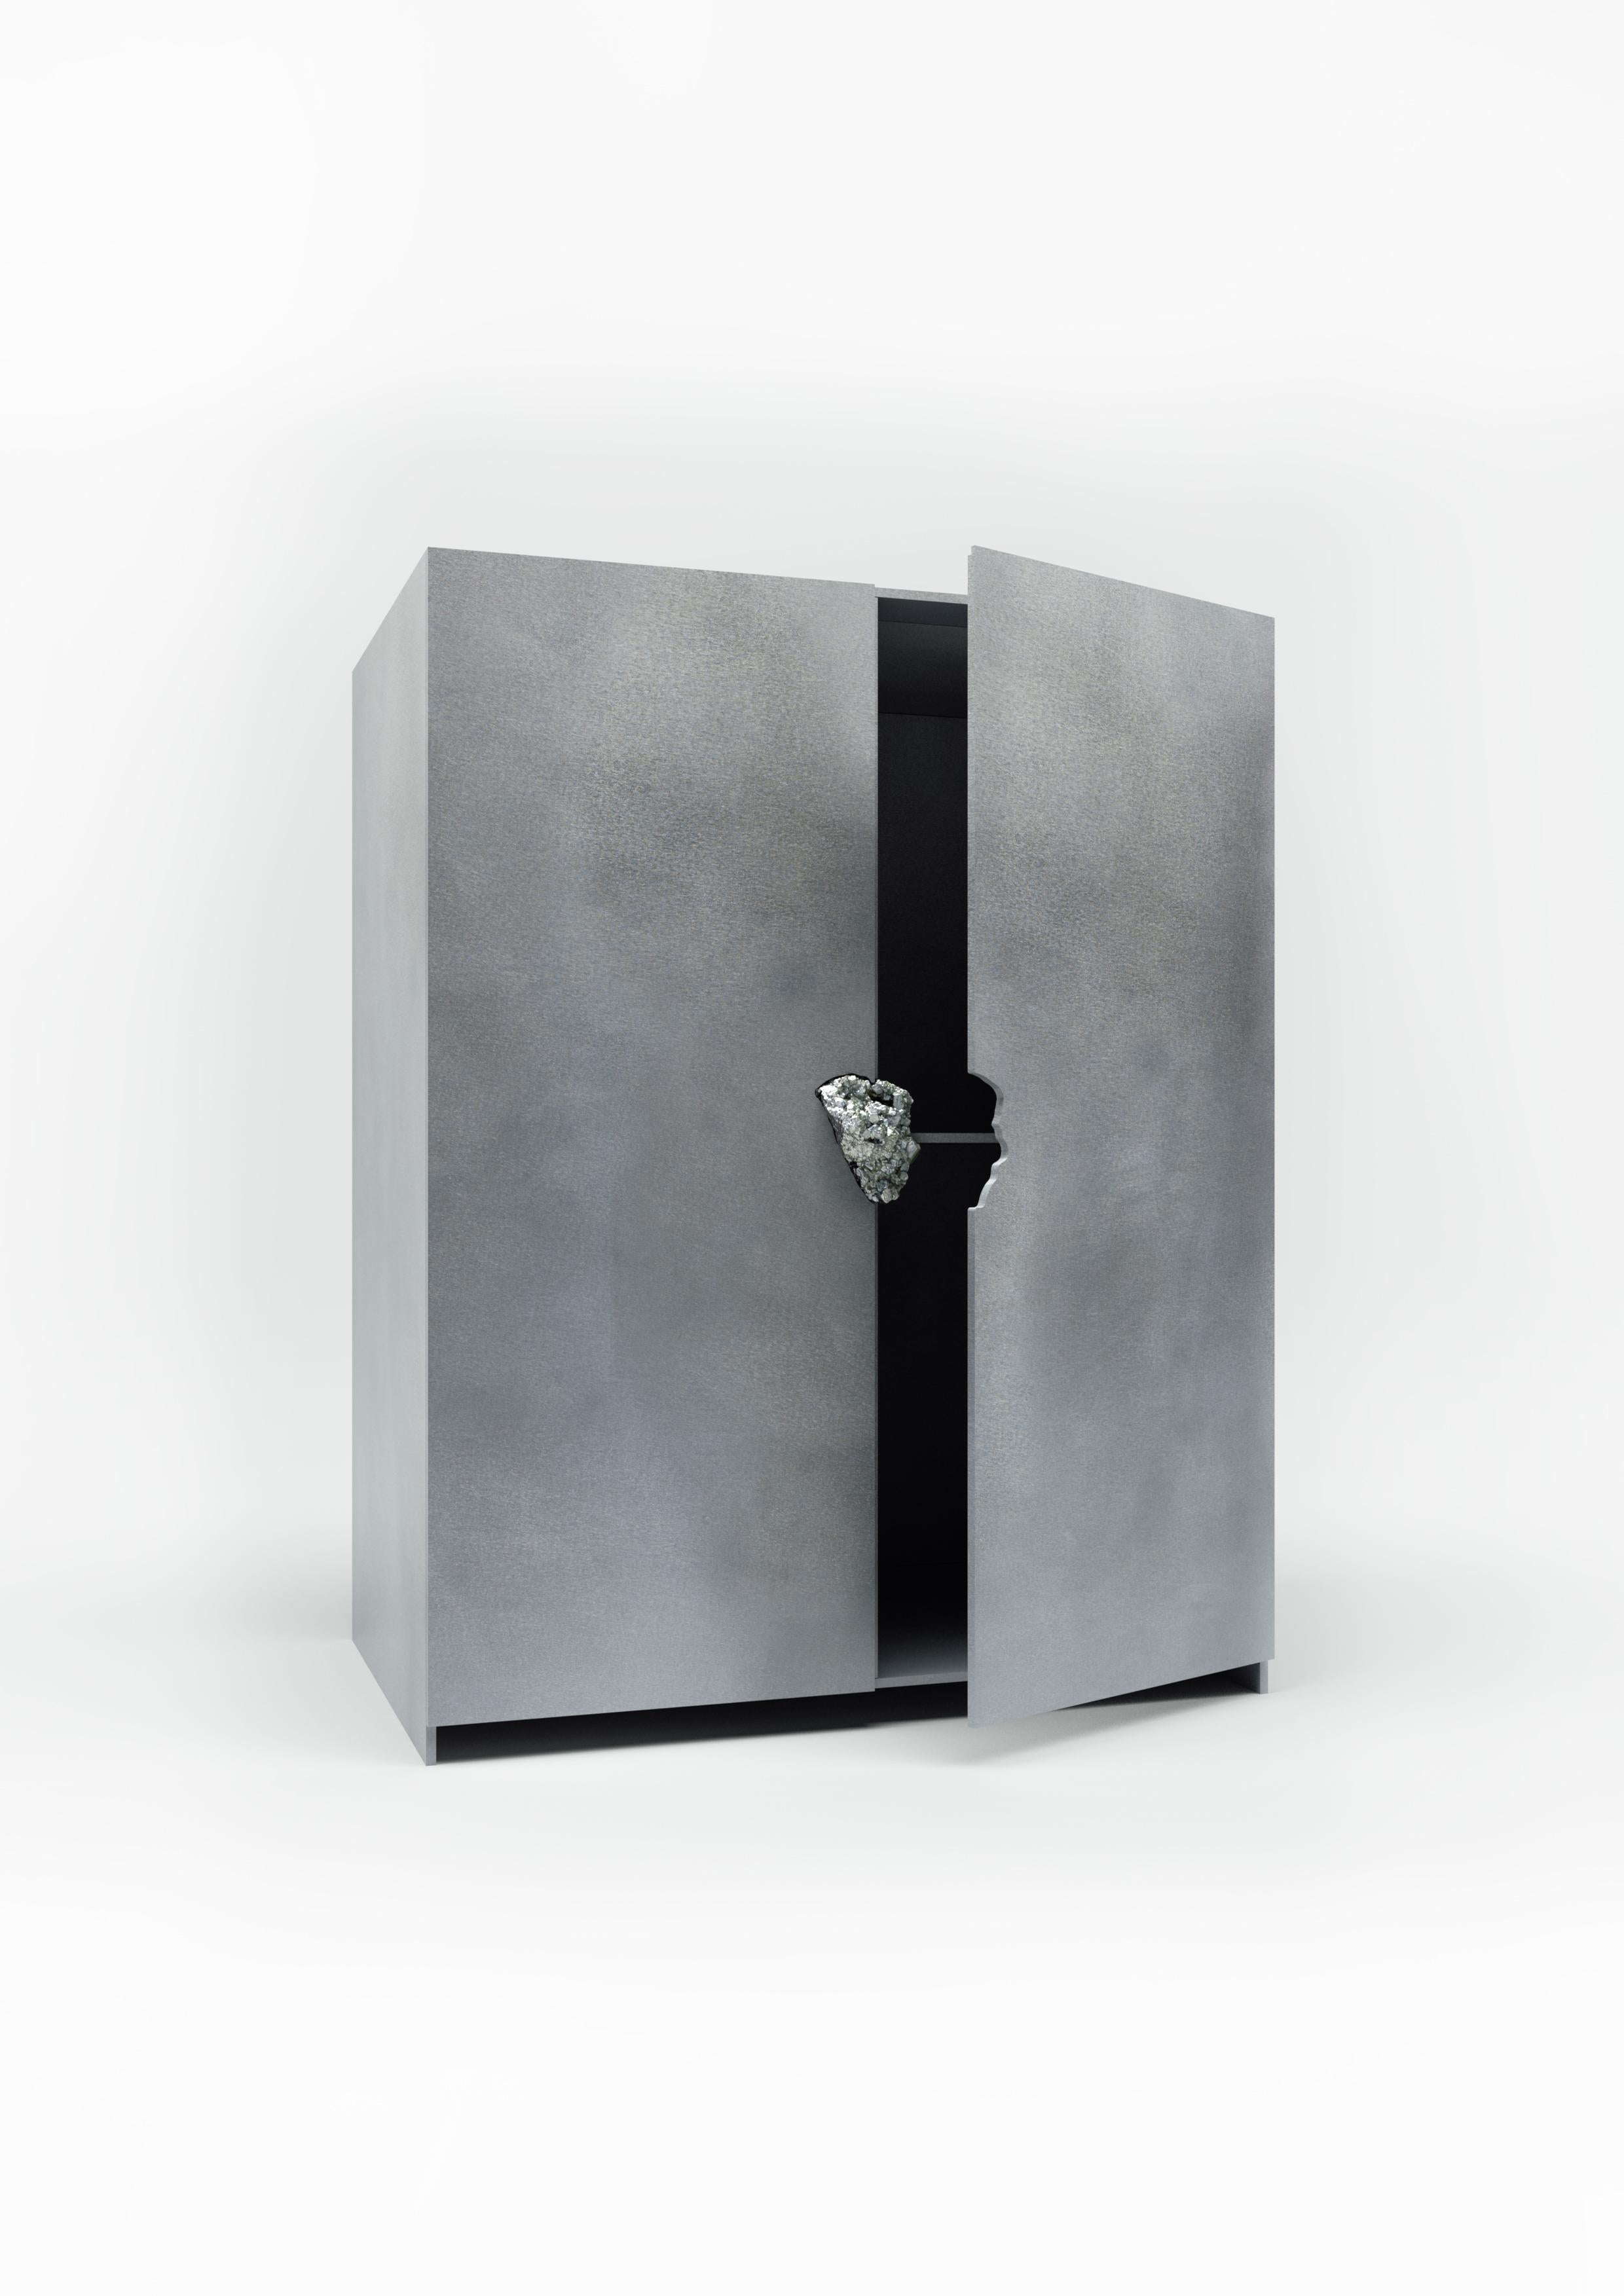 Minimalist Oxidized and Waxed Aluminium Cabinet with Pyrite by Pierre De Valck For Sale